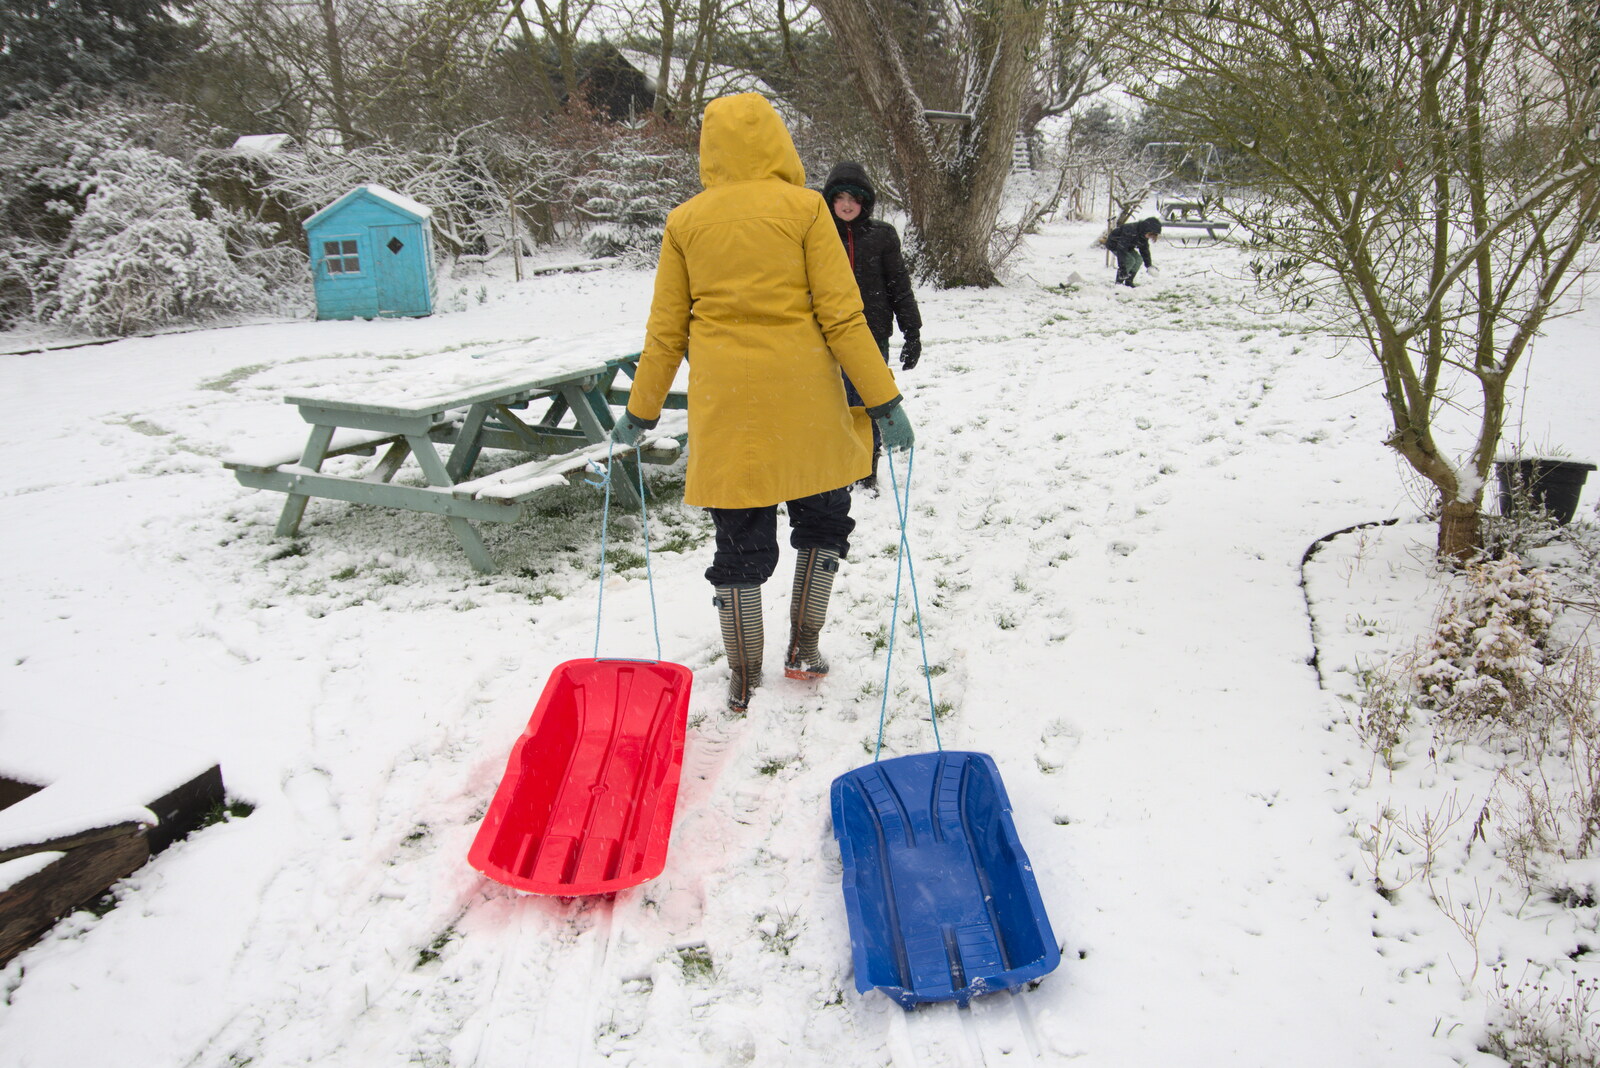 Isobel drags the sledges around from Beast From The East Two - The Sequel, Brome, Suffolk - 8th February 2021